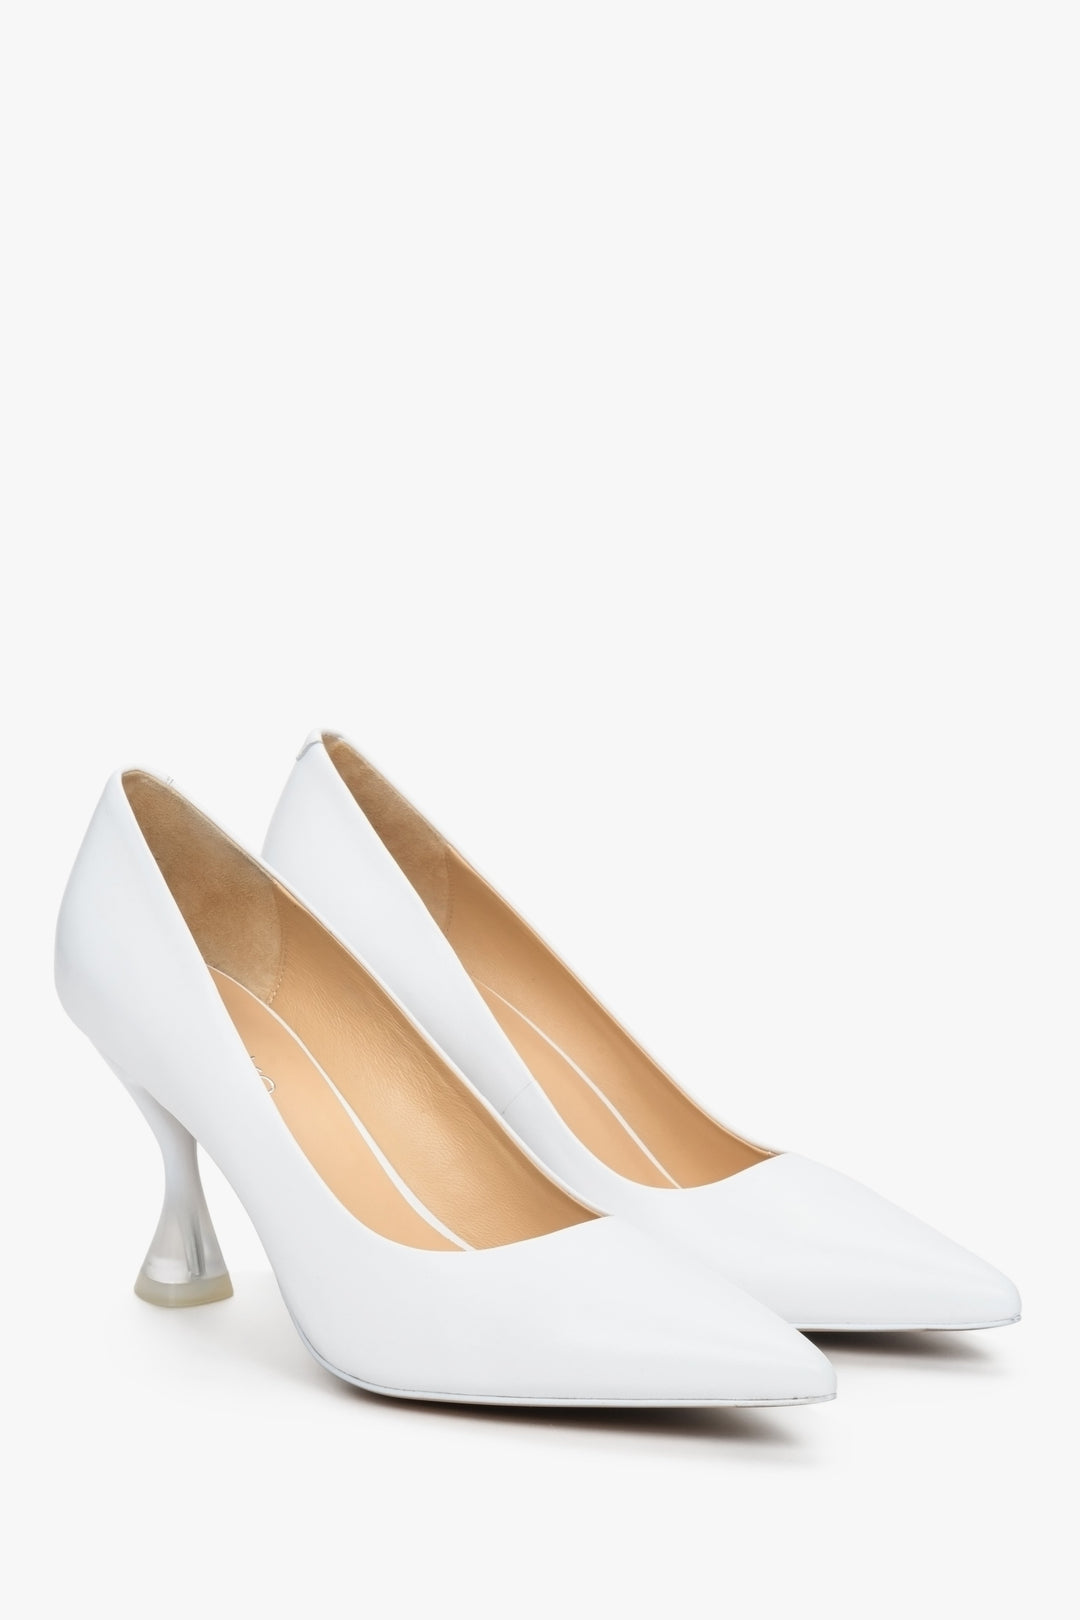 Women's white pointed high-heeled pumps - presentation of the front and side of the shoes.